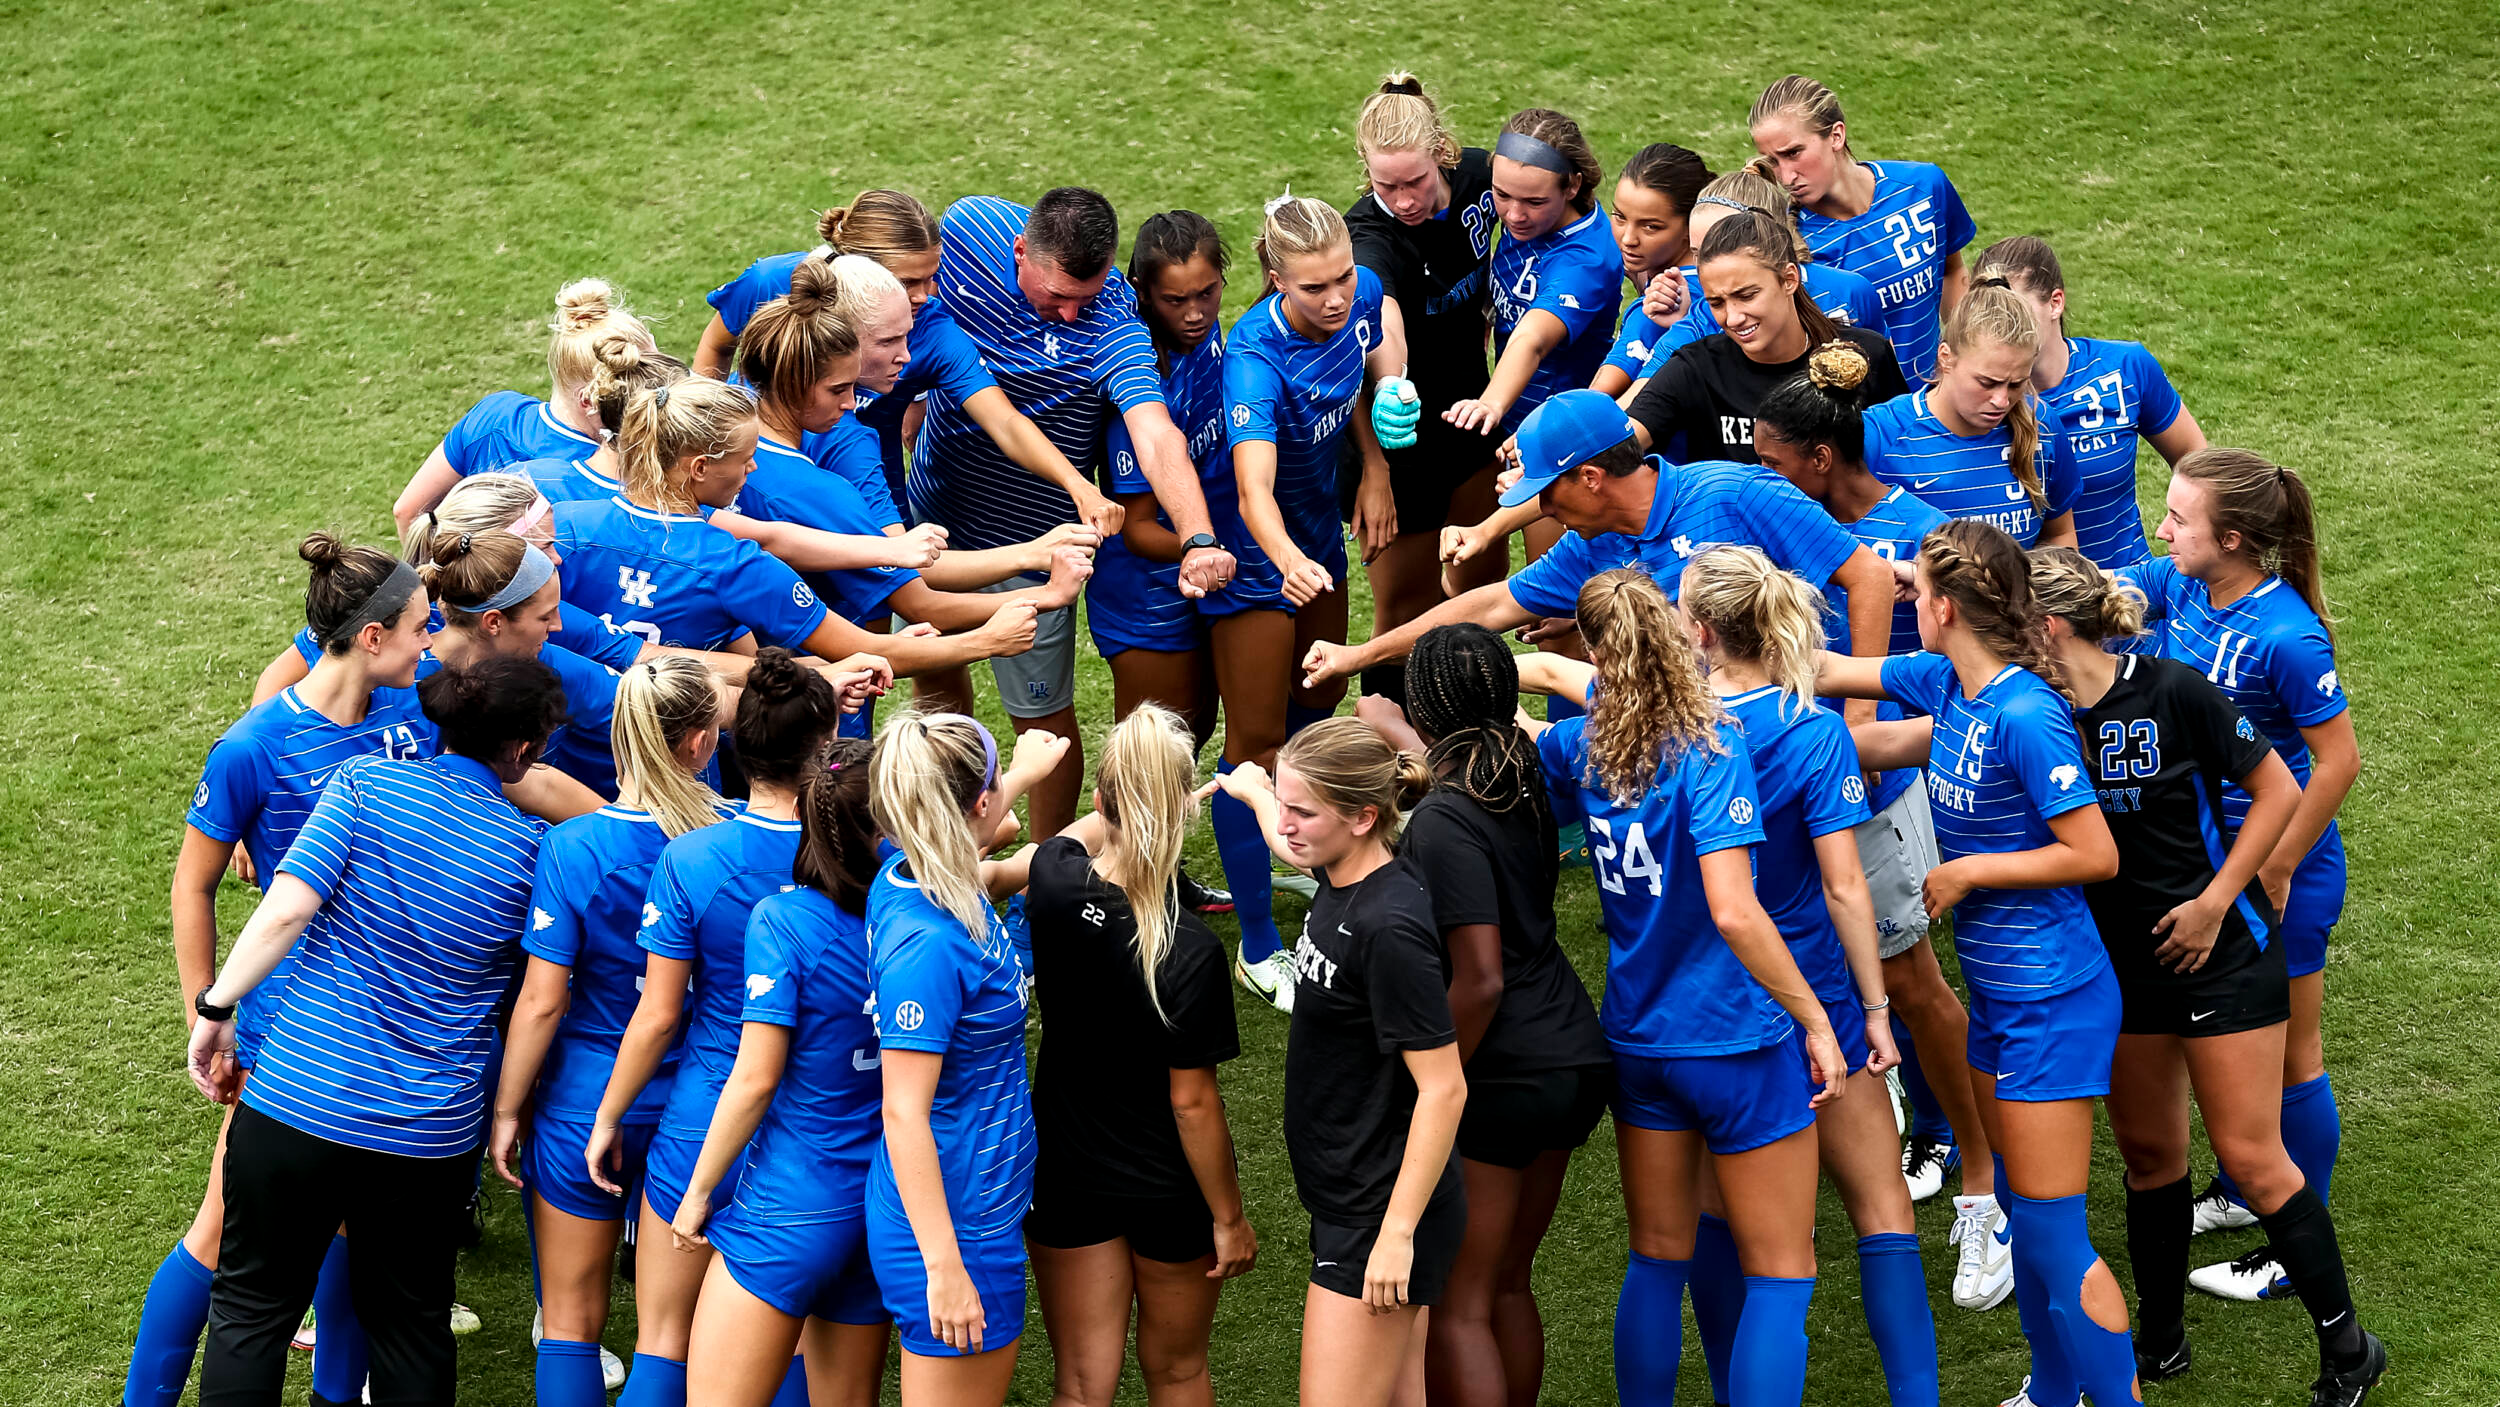 Kentucky Hosts Wright State in Penultimate Non-Conference Match